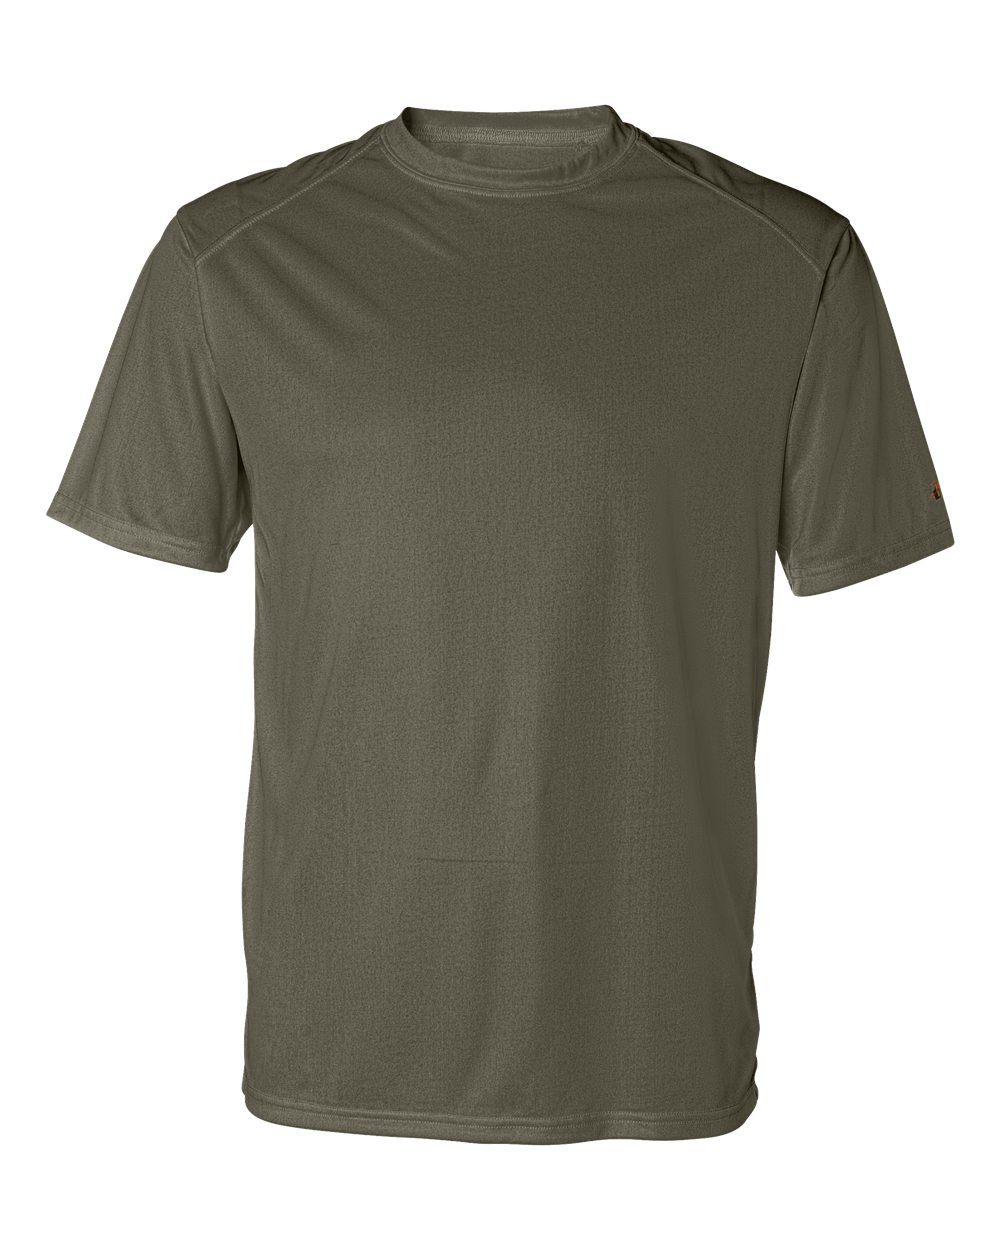 Badger Sport 4120 B-Core T-Shirt with Sport Shoulders $9.06 - T-Shirts